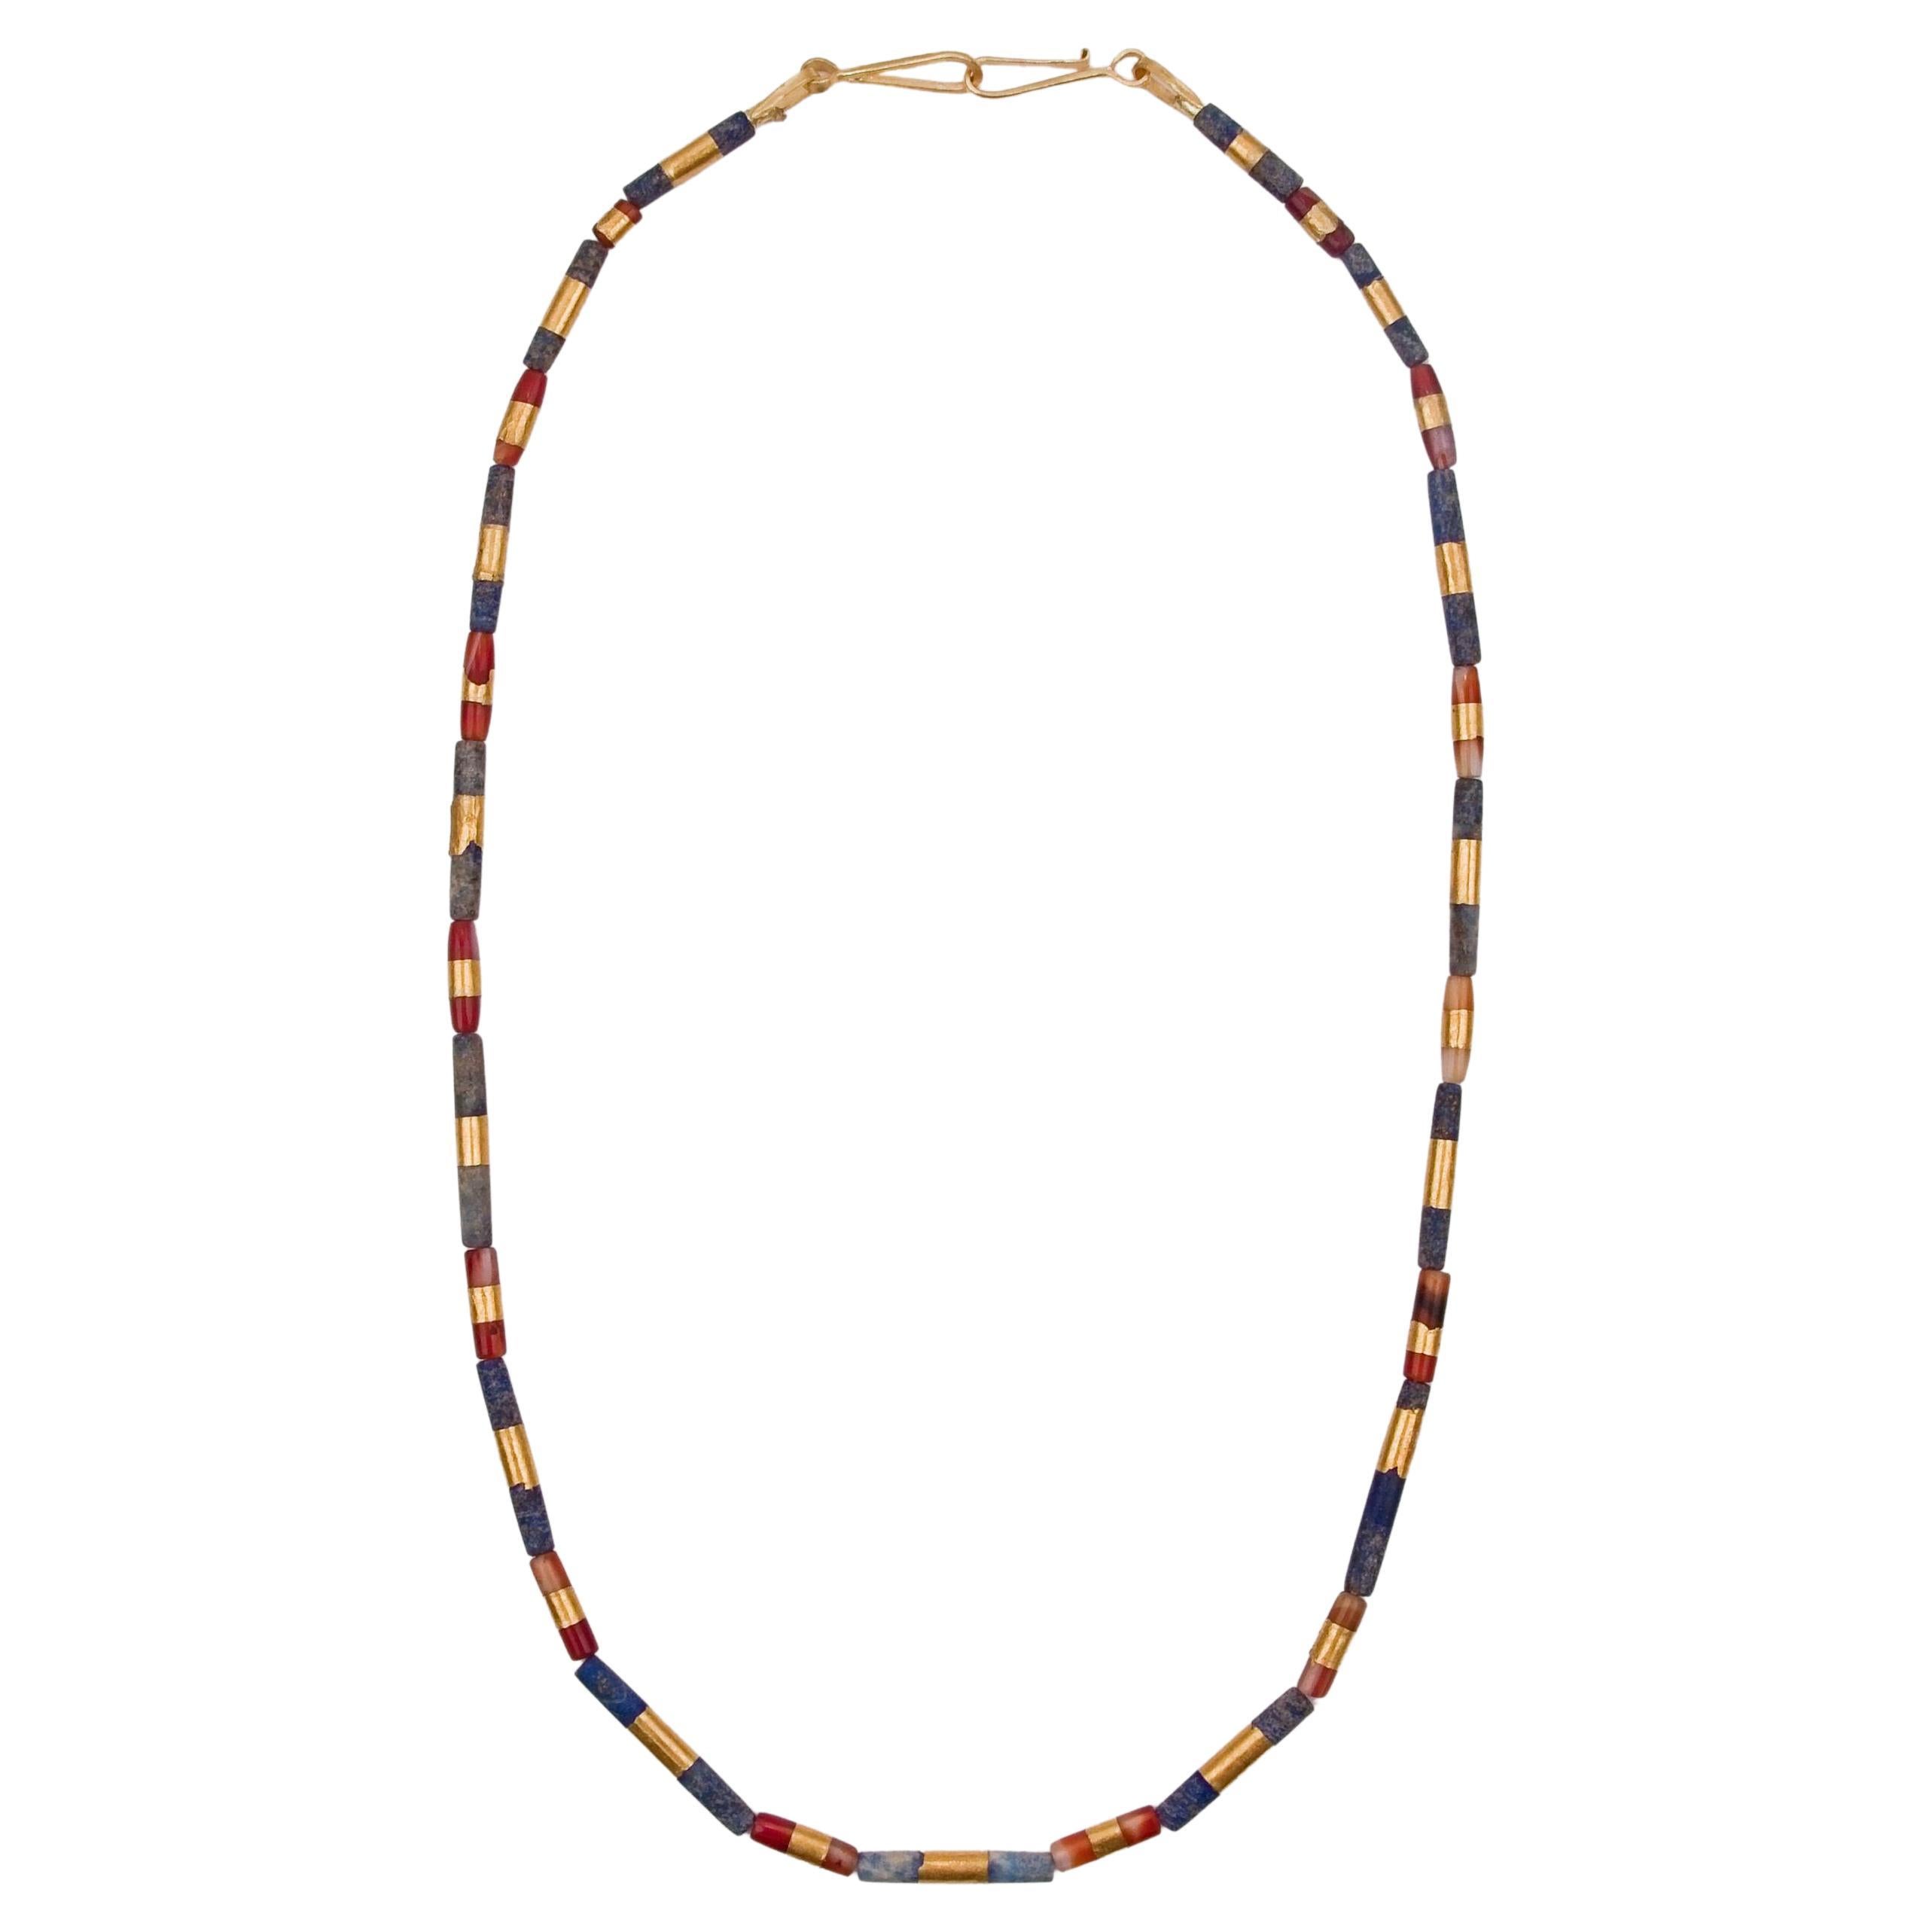 Ancient Lapis Lazuli, Carnelian Beads with Custom 22k Gold Banding For Sale